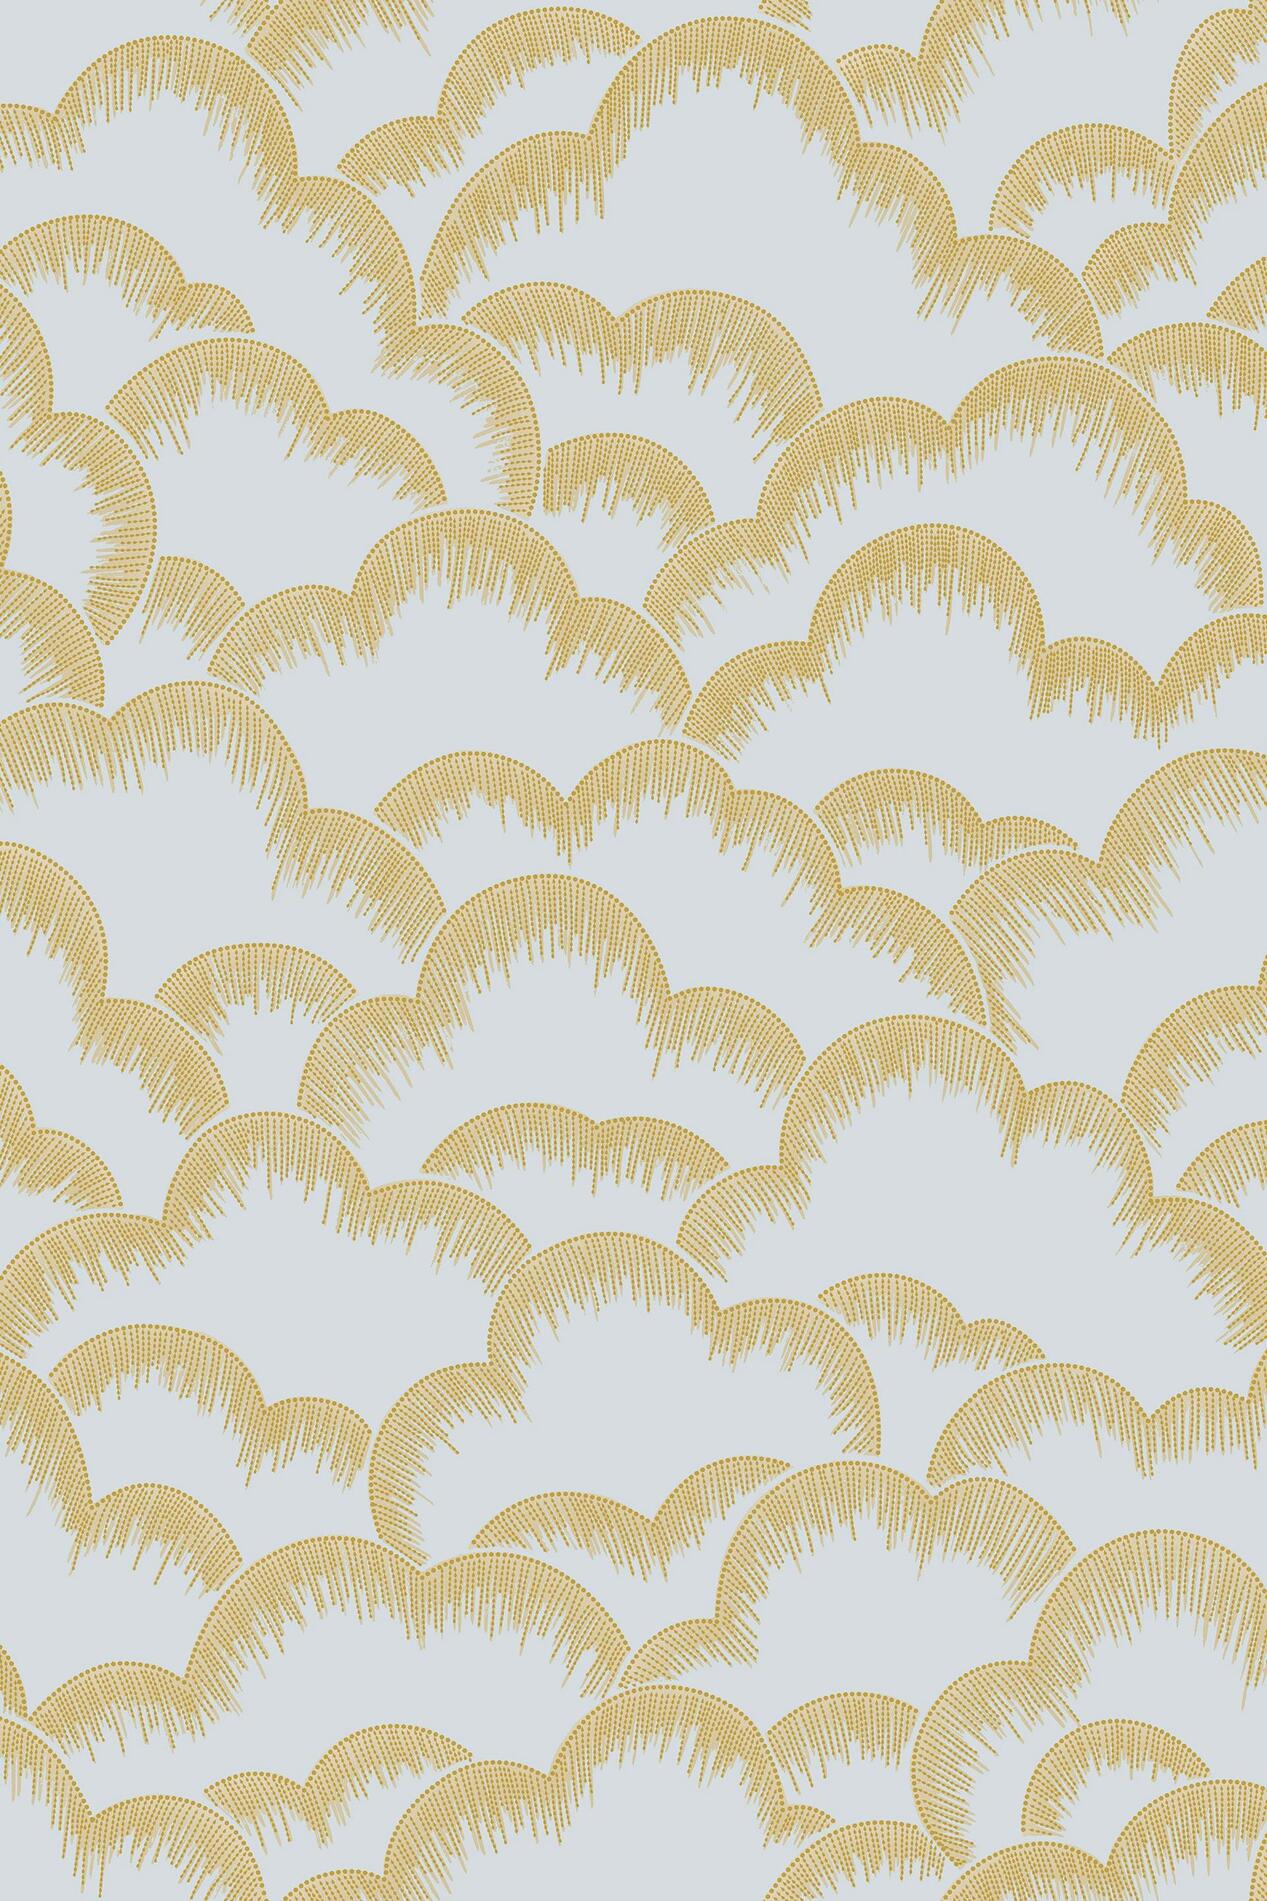 hooked-on-walls-exotique-cumulus-wallcovering-17263